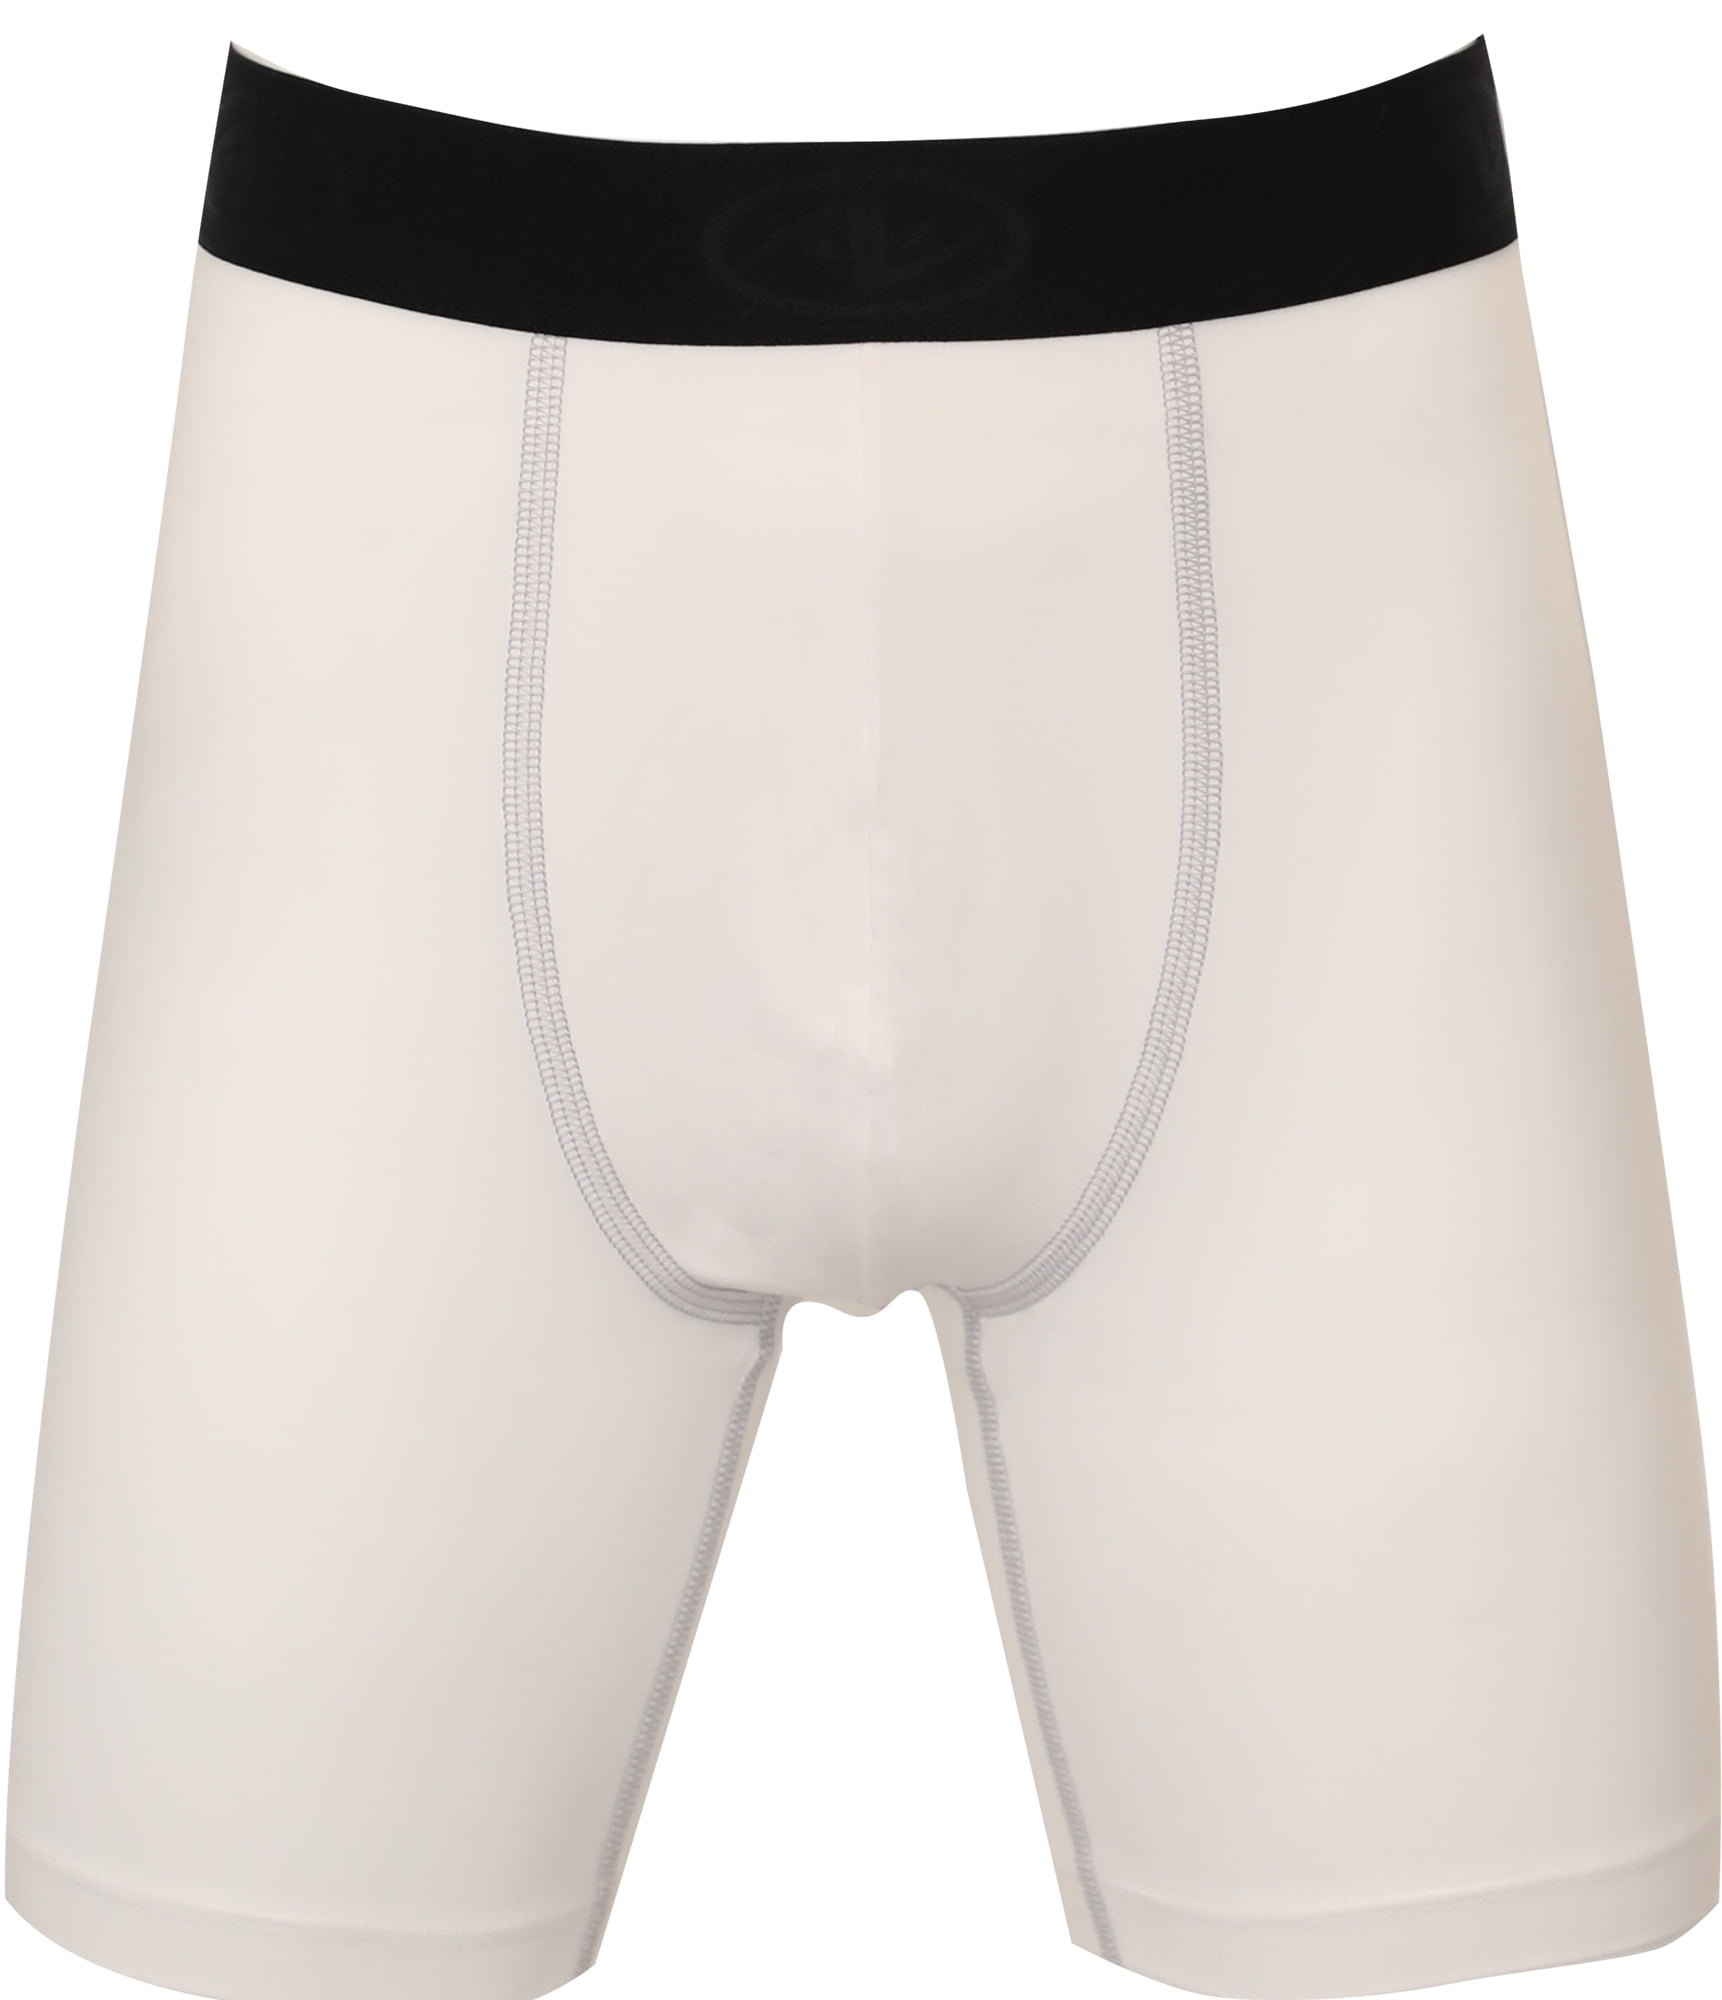 McDavid Boys' Boxer Brief Shorts with FlexCup Athletic Protection